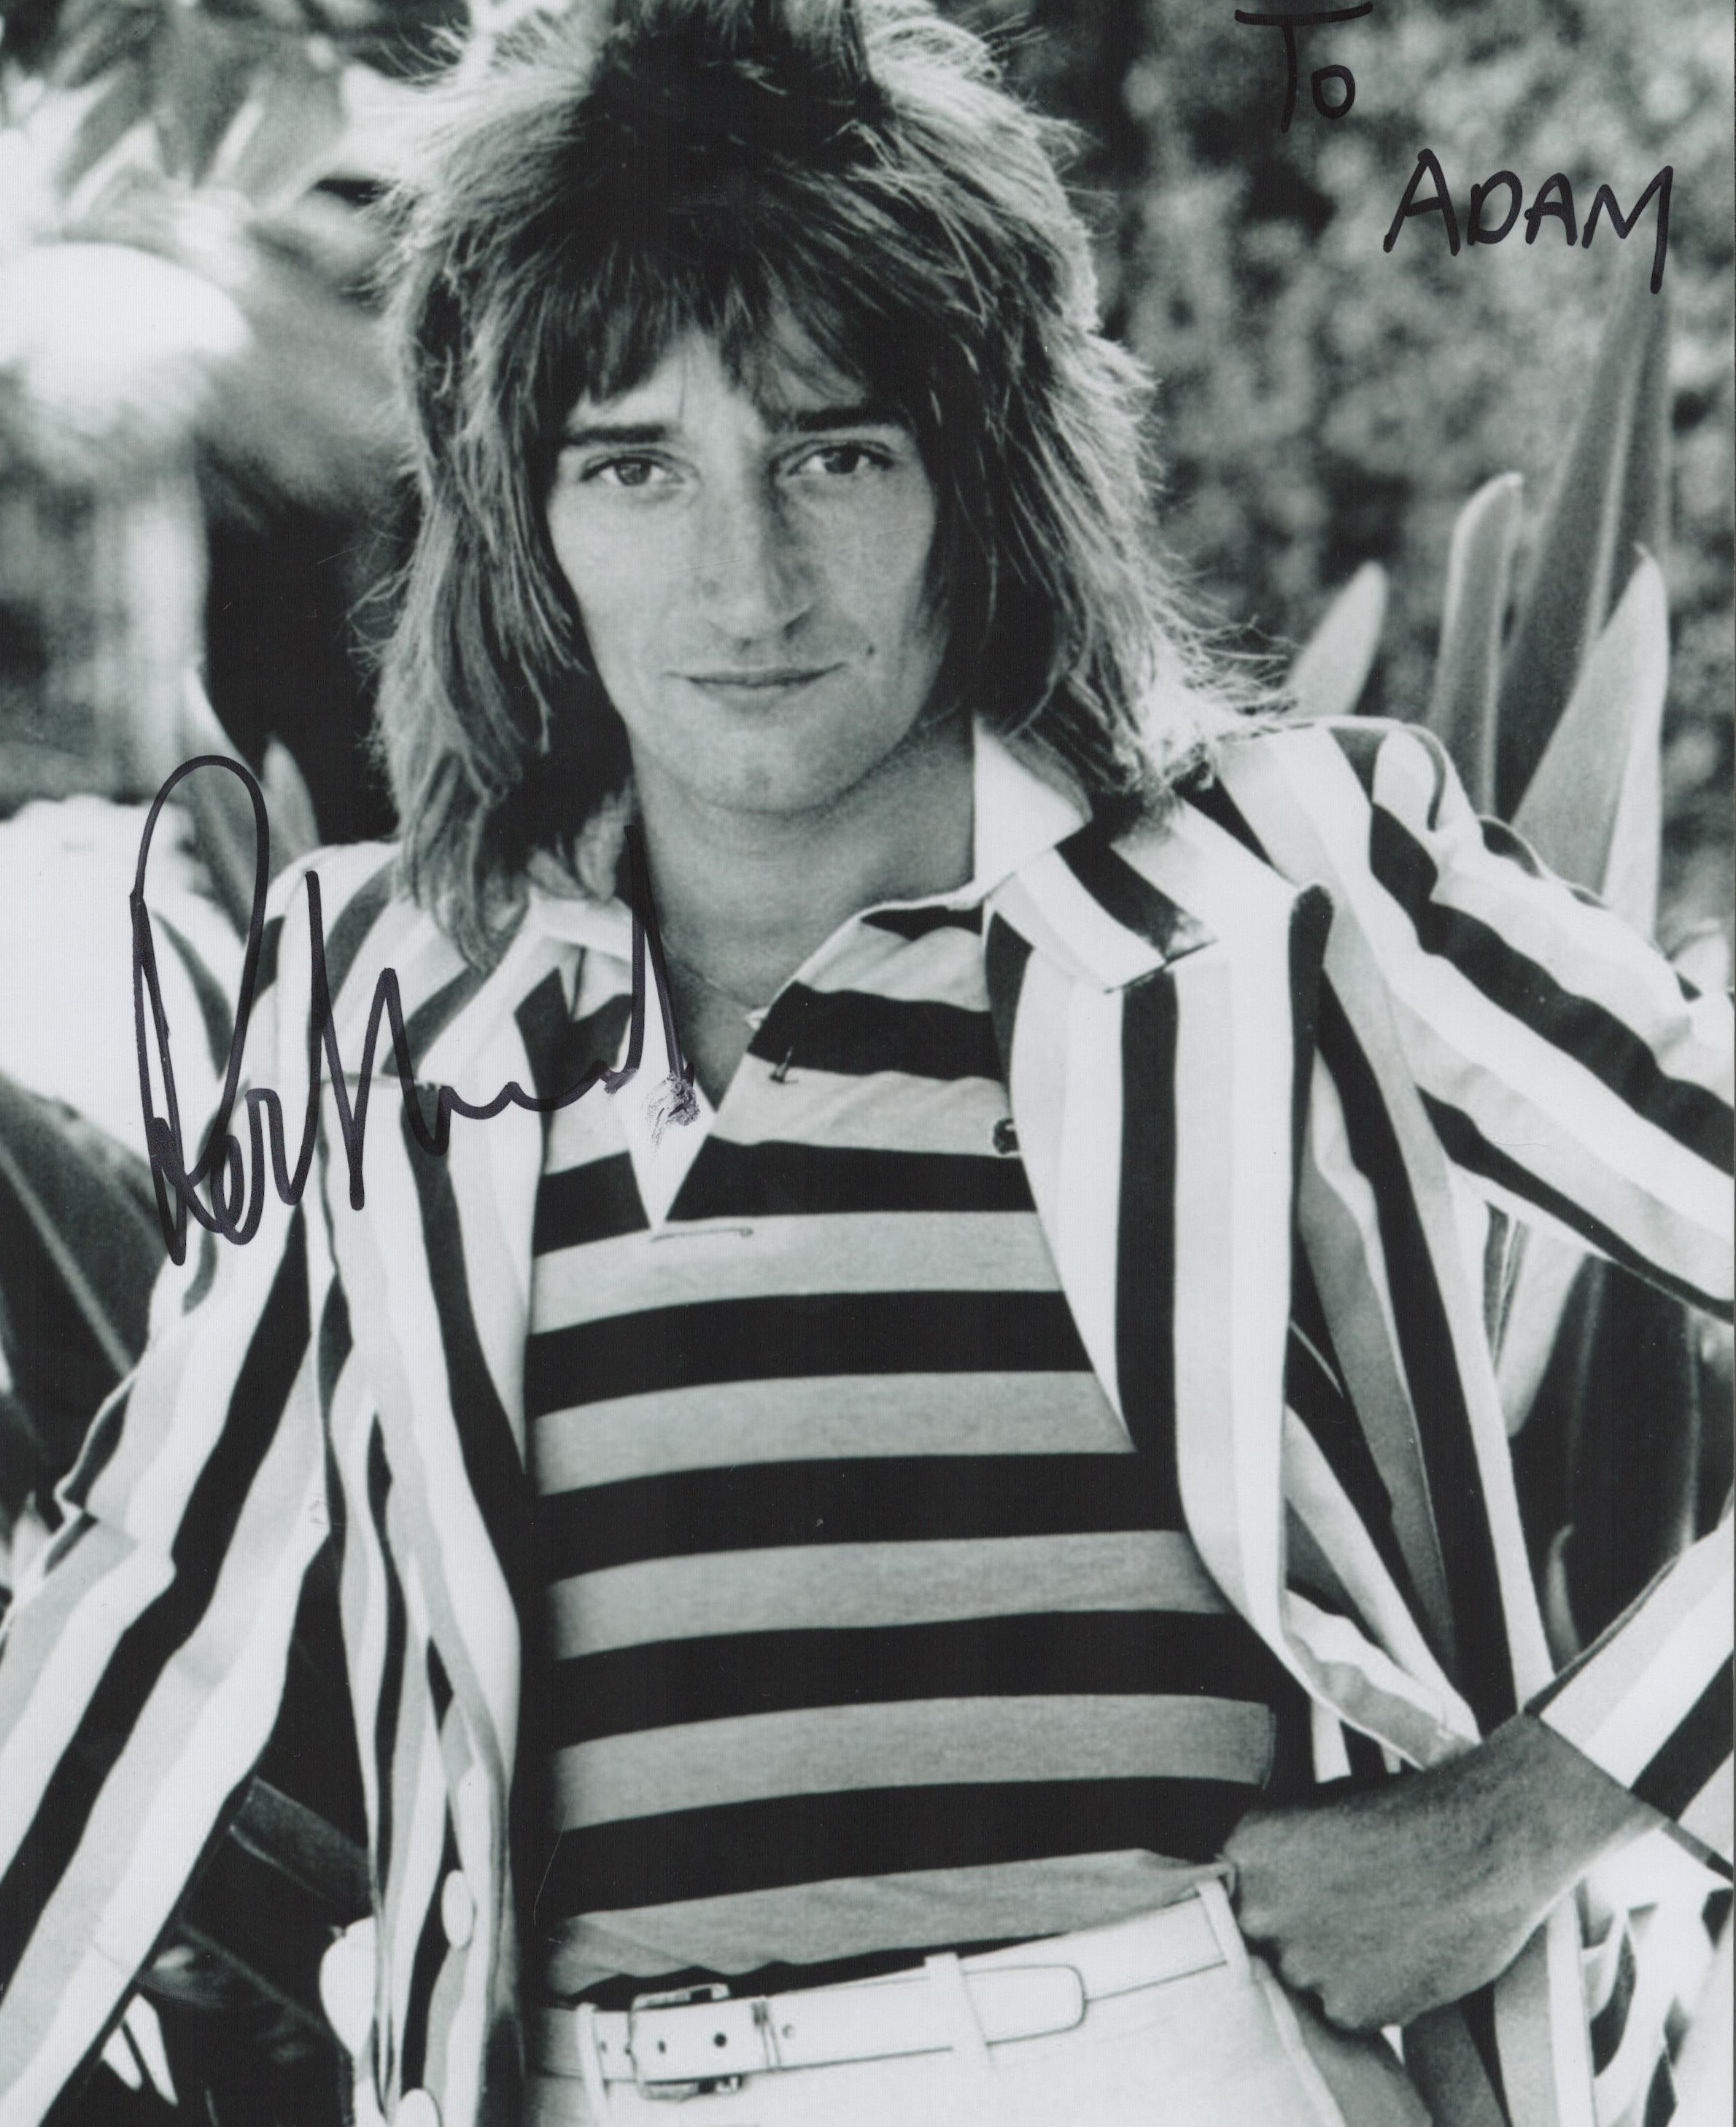 Rod Stewart signed 10x8 black and white photo dedicated. Good condition. All autographs come with